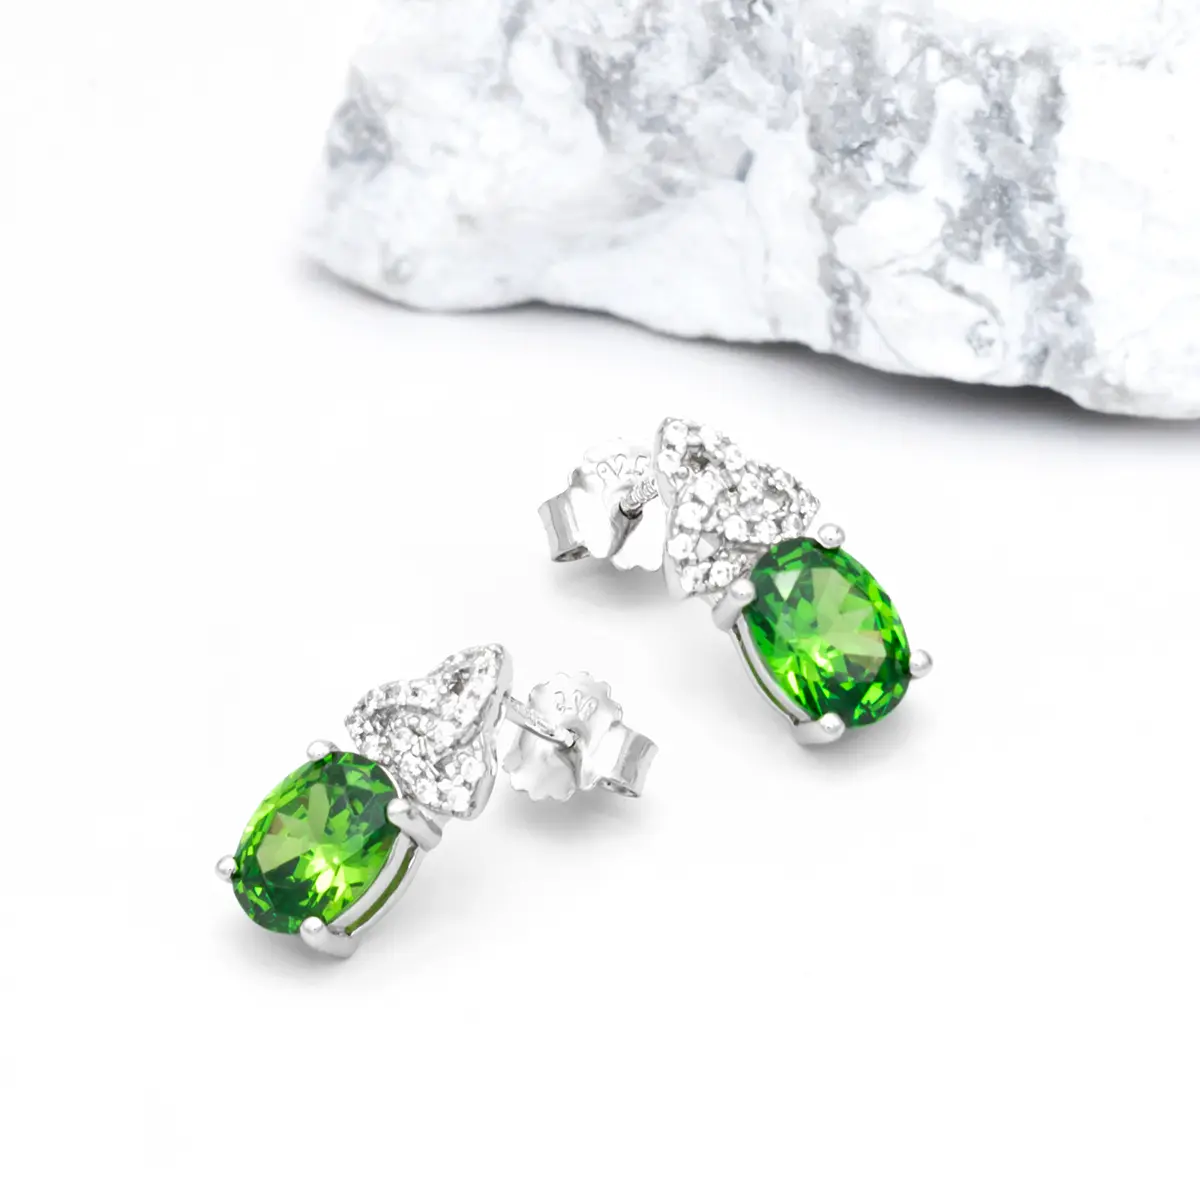 Silver Trinity Knot Stud Earrings With Green Cubic Zirconia...